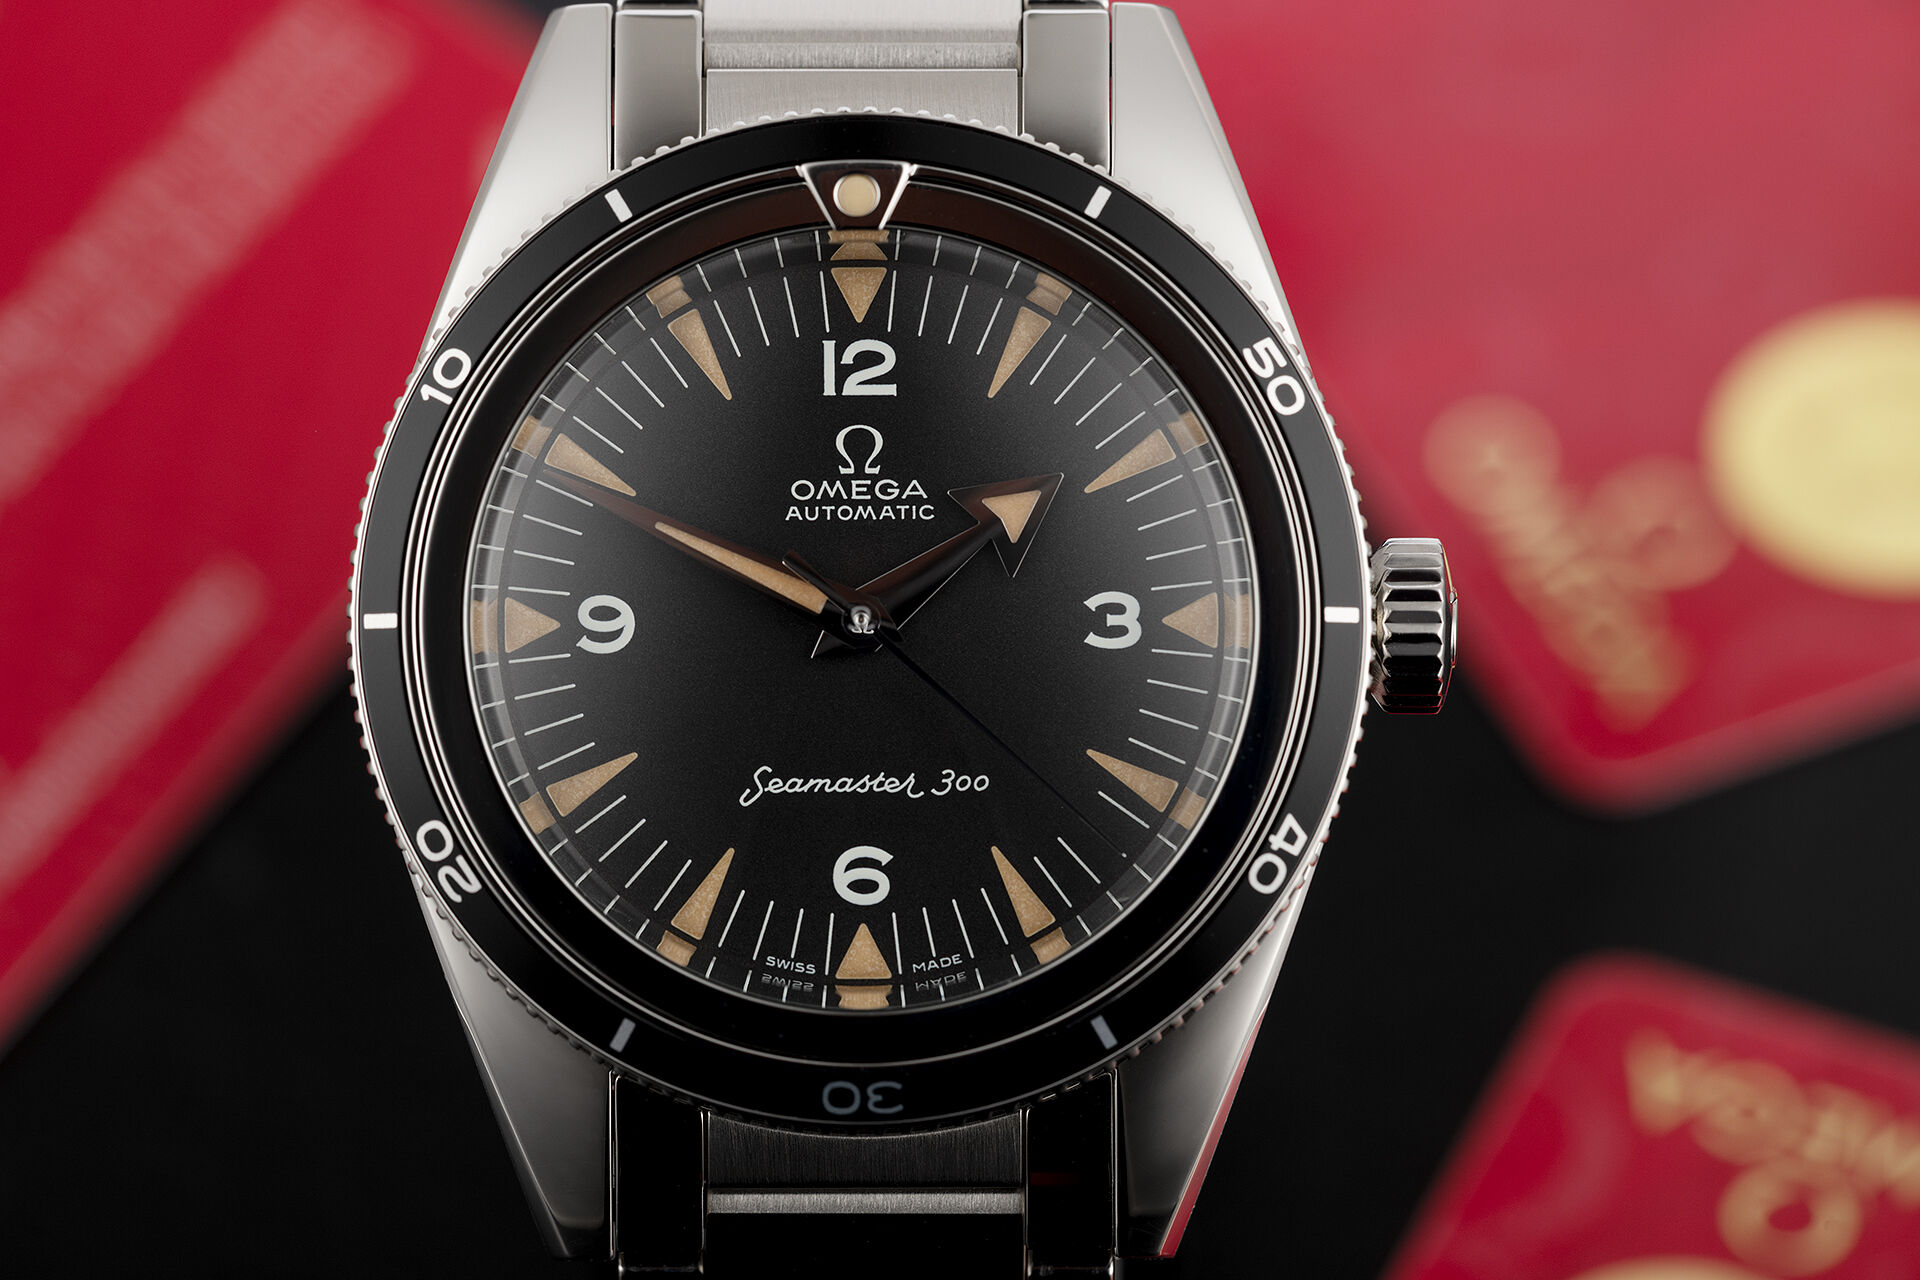 ref 234.10.39.20.01.001 | '60th Anniversary' Limited Edition | Omega Seamaster 300